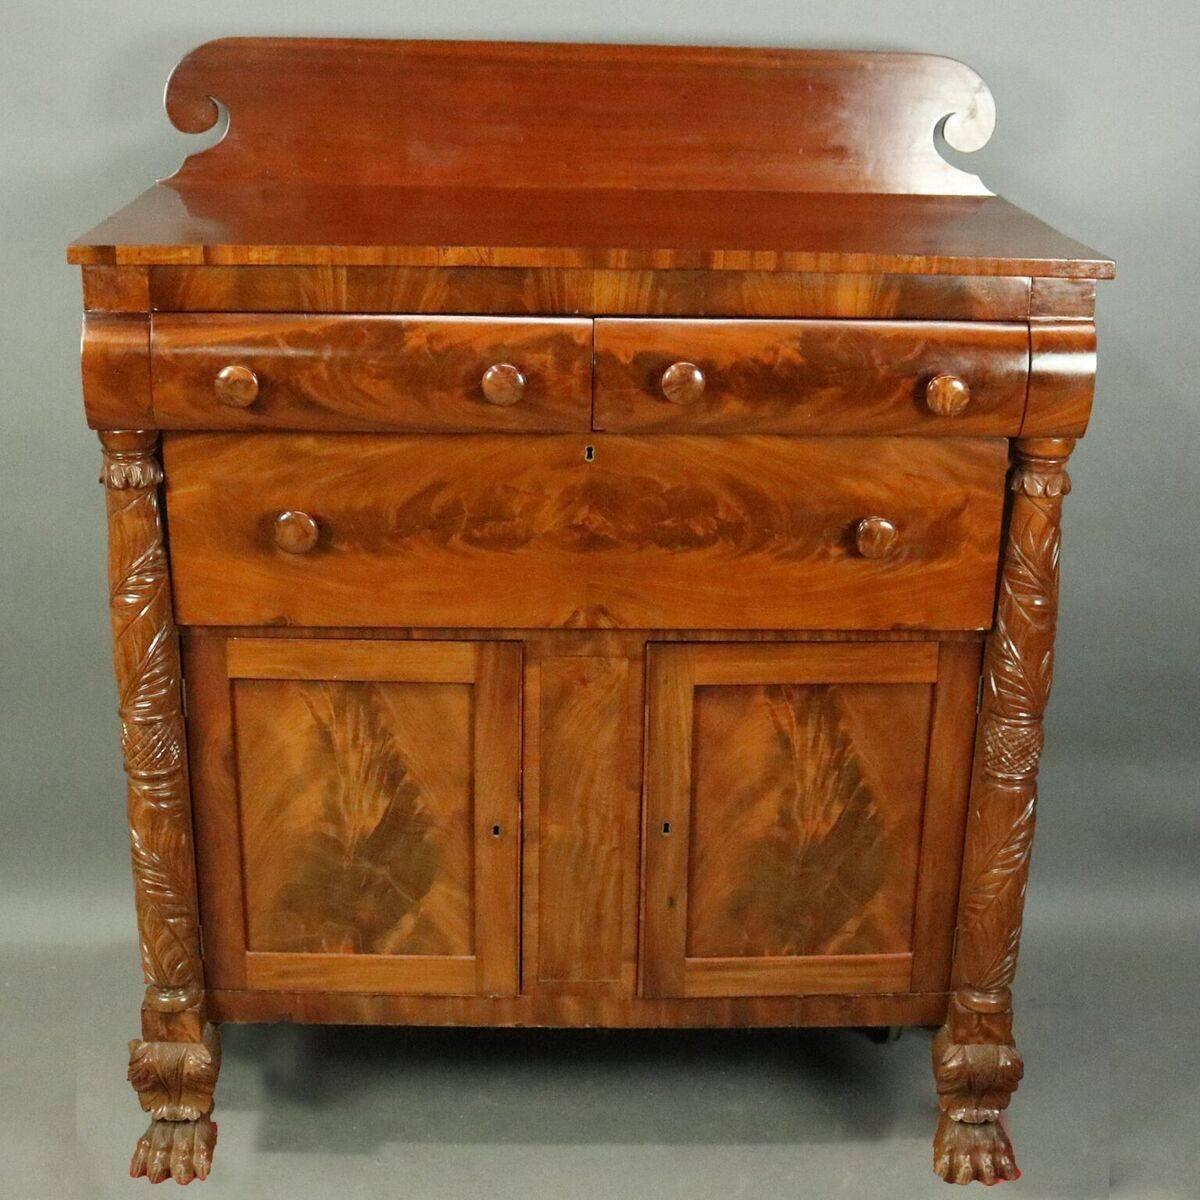 Antique American Empire Jackson Press features mahogany construction with flame mahogany cabinet flanked by acanthus carved columns terminating in paw feet, two convex upper drawers above one long drawer, en verso label reads The Linus & Fenn